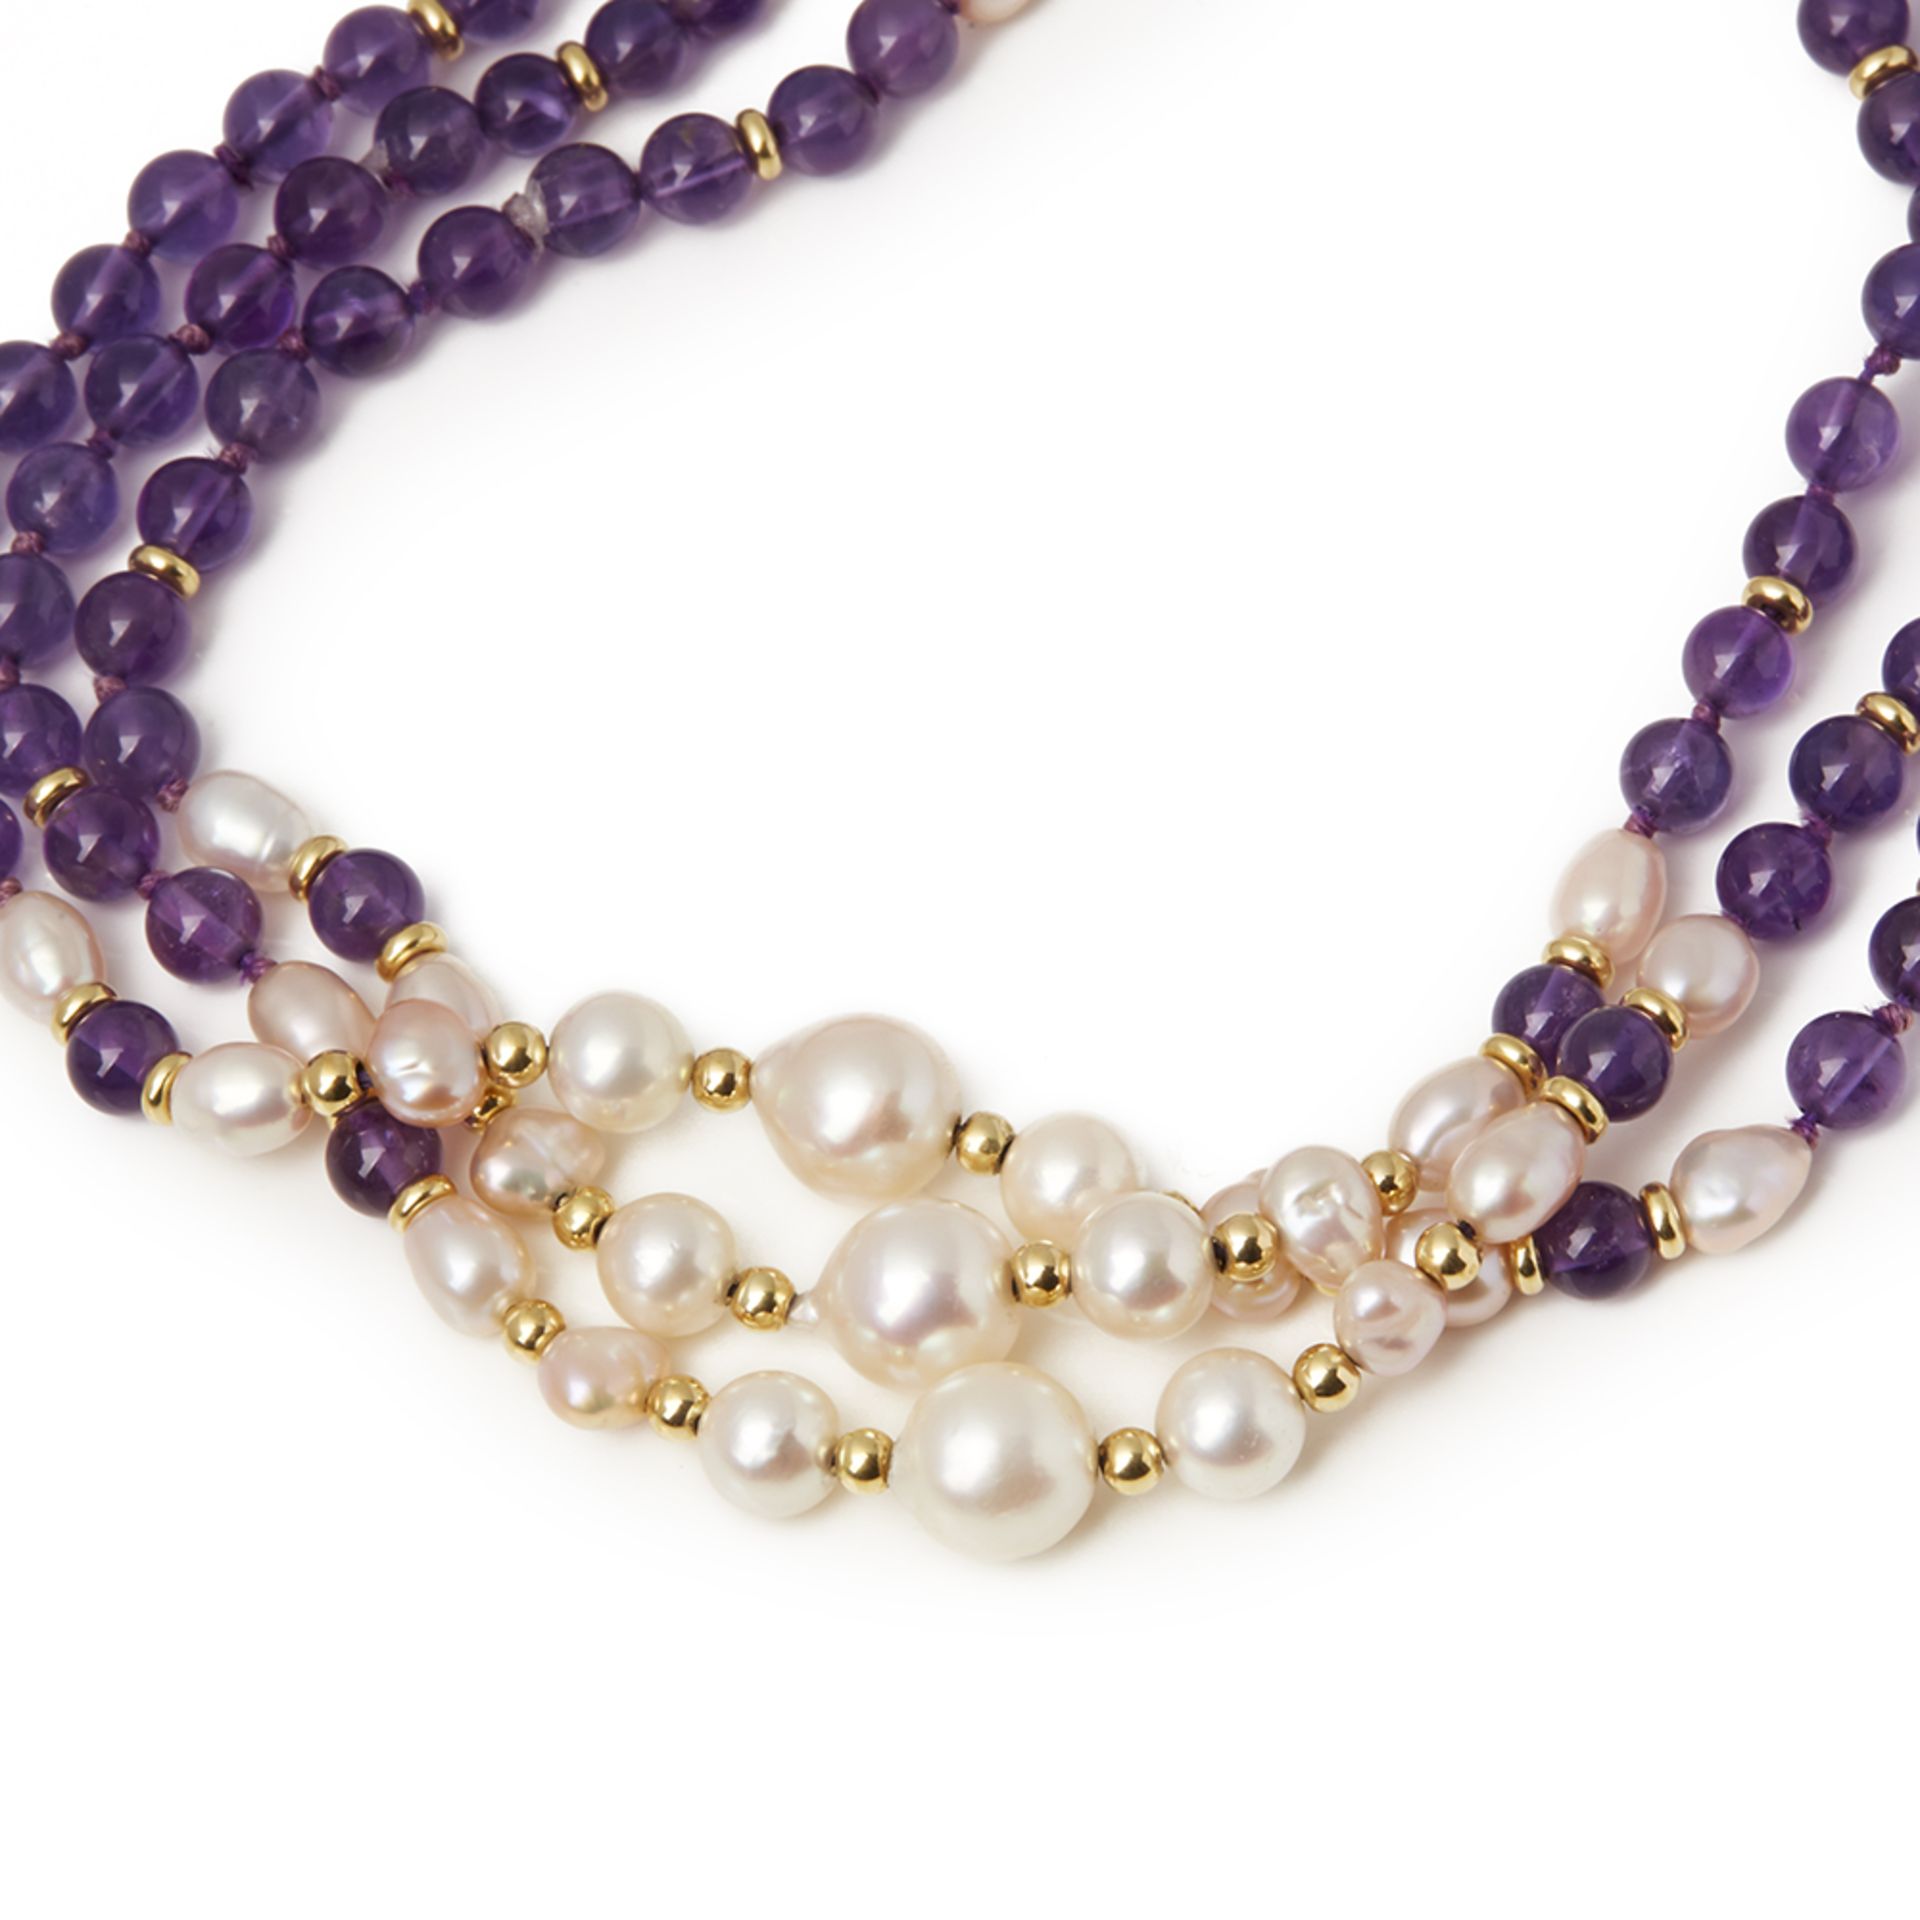 Cellini 18k Yellow Gold Amethyst & Cultured Pearl Multi-Strand Bracelet - Image 2 of 6